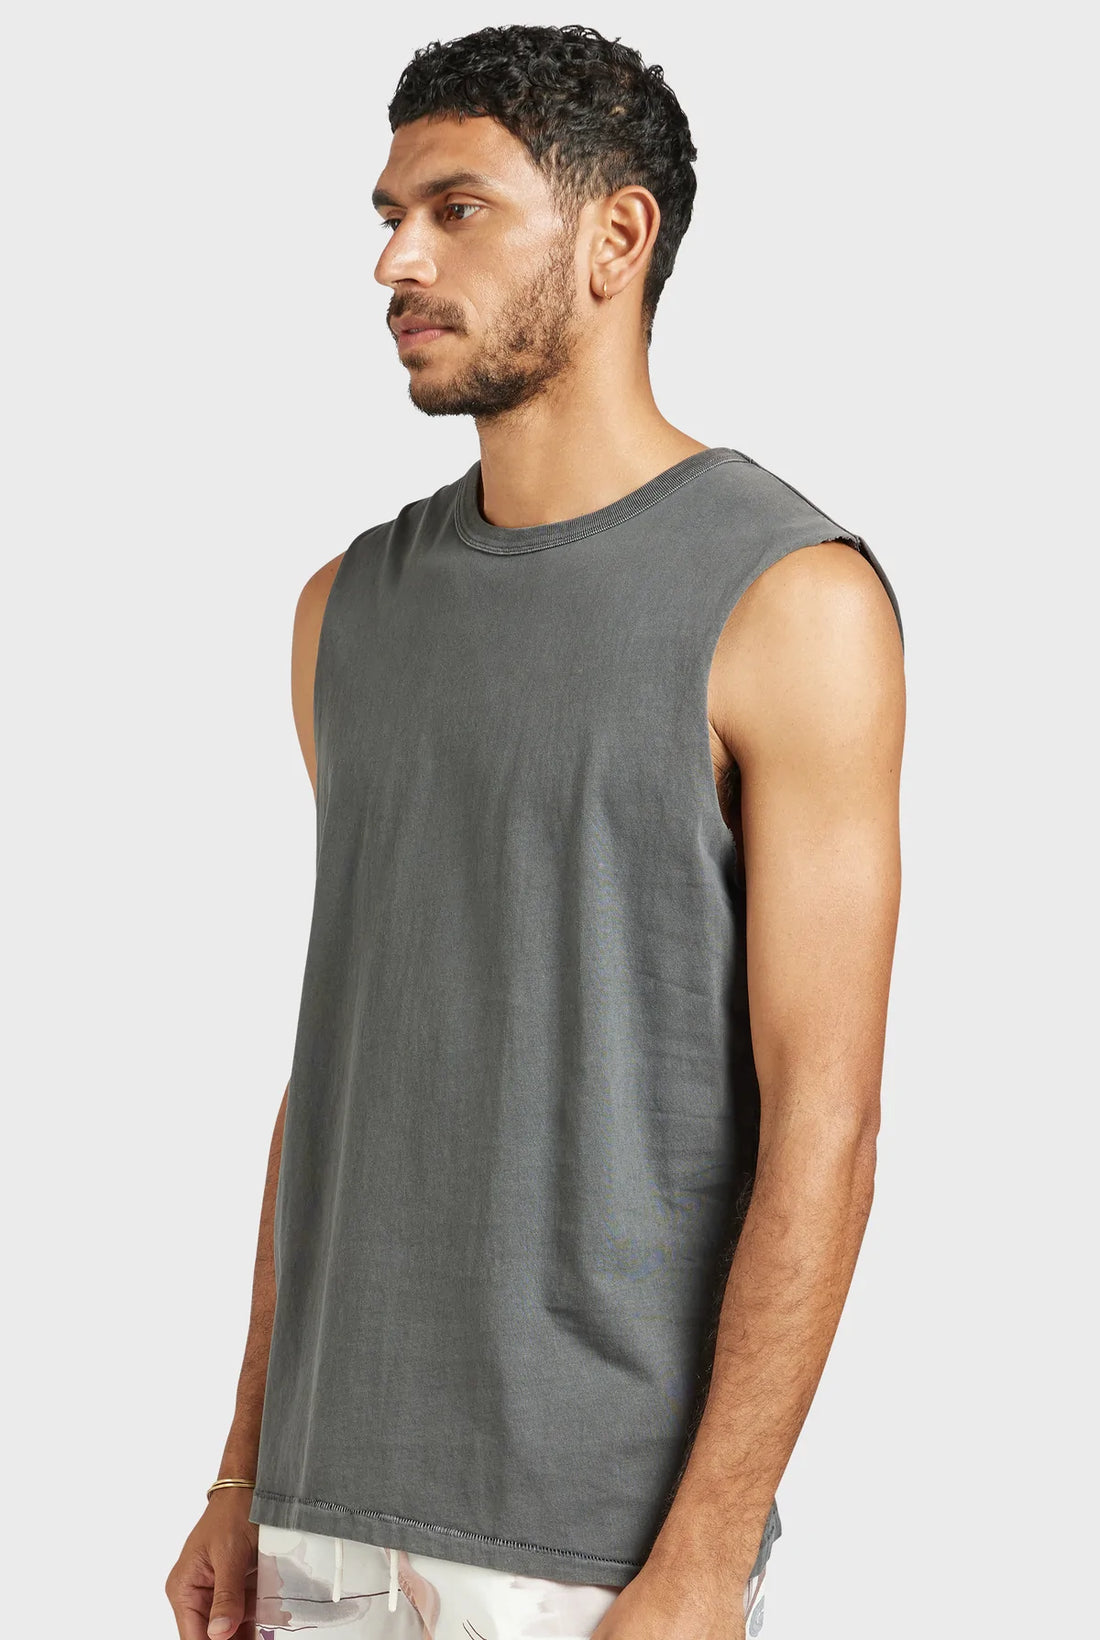 The Academy Brand Jimmy Muscle Tee - Magnet Grey